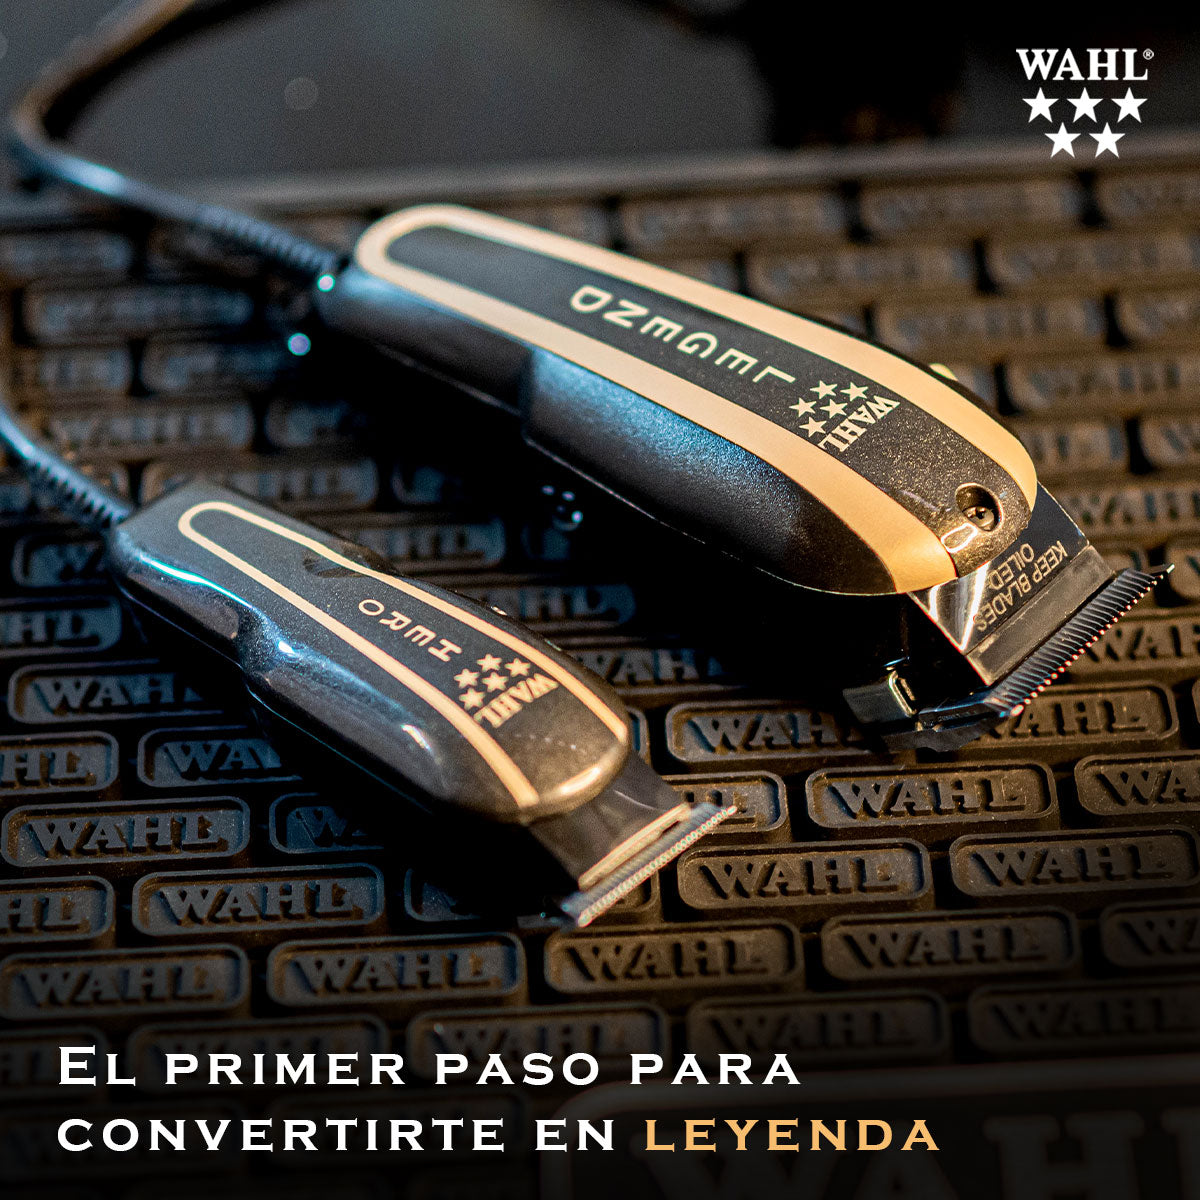 Combo Barber Wahl Clipper y Trimmer